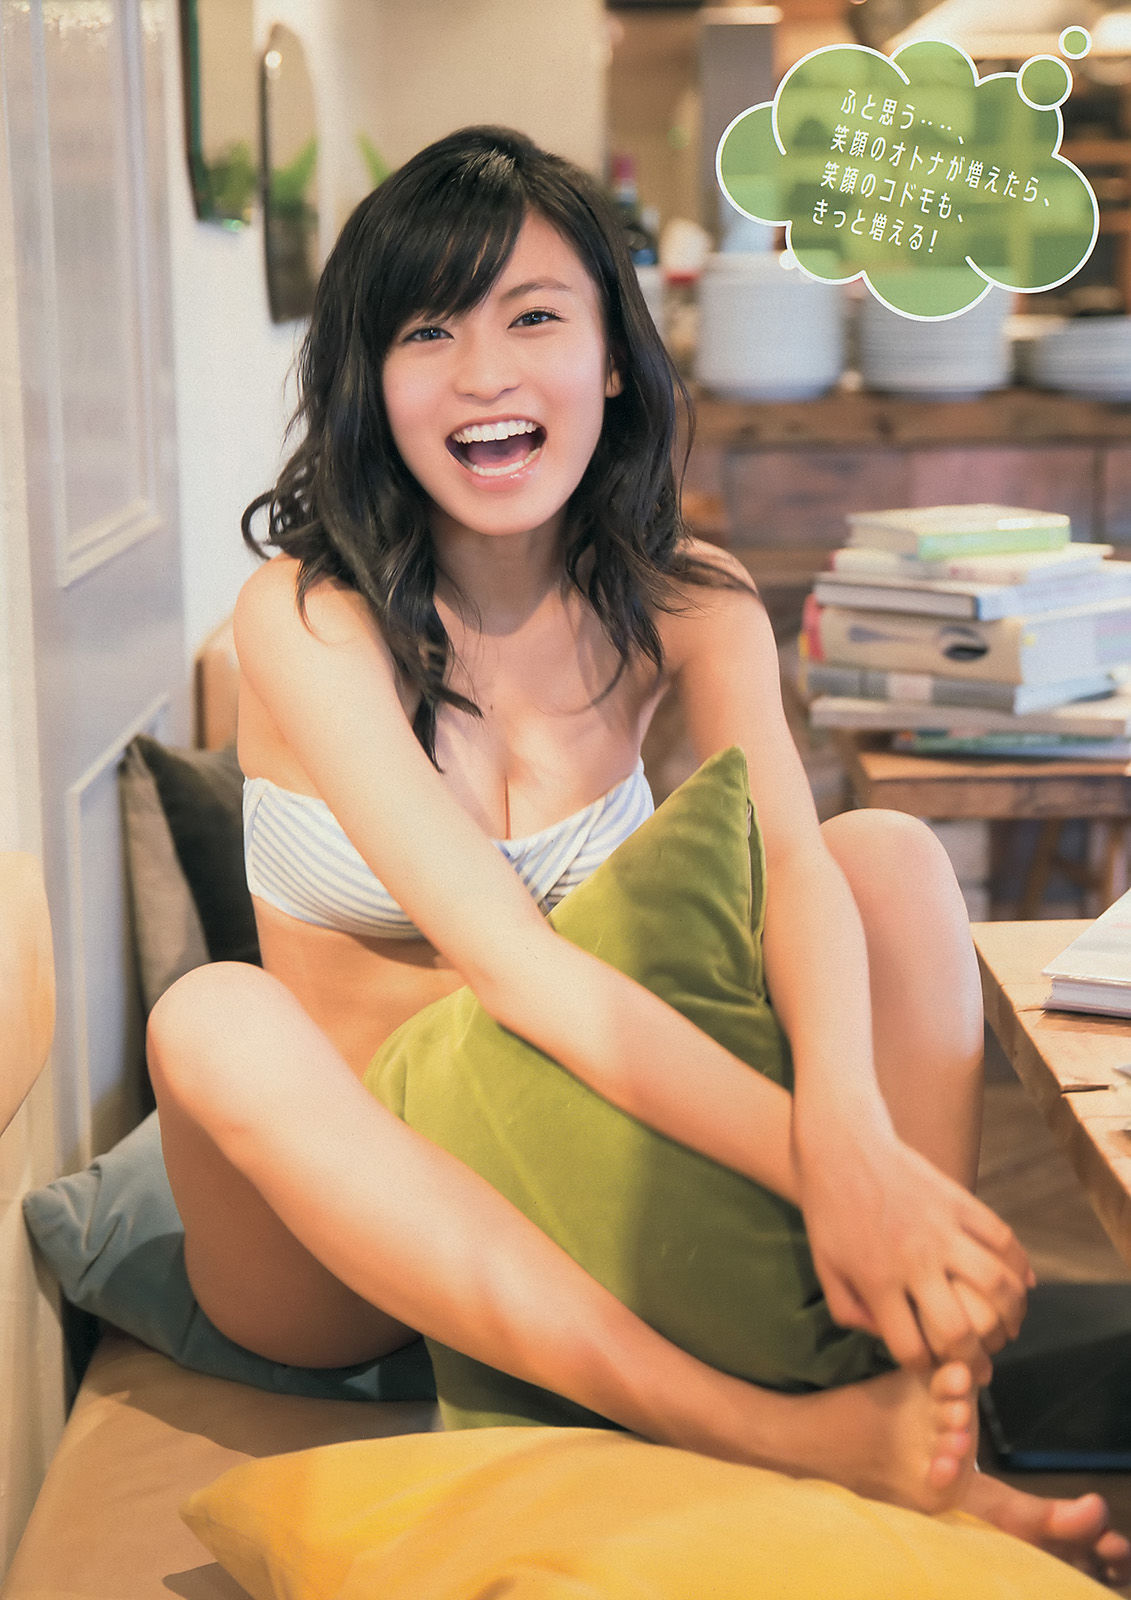 [Young Magazine] 2014年No.11 小島瑠璃子 宮城舞